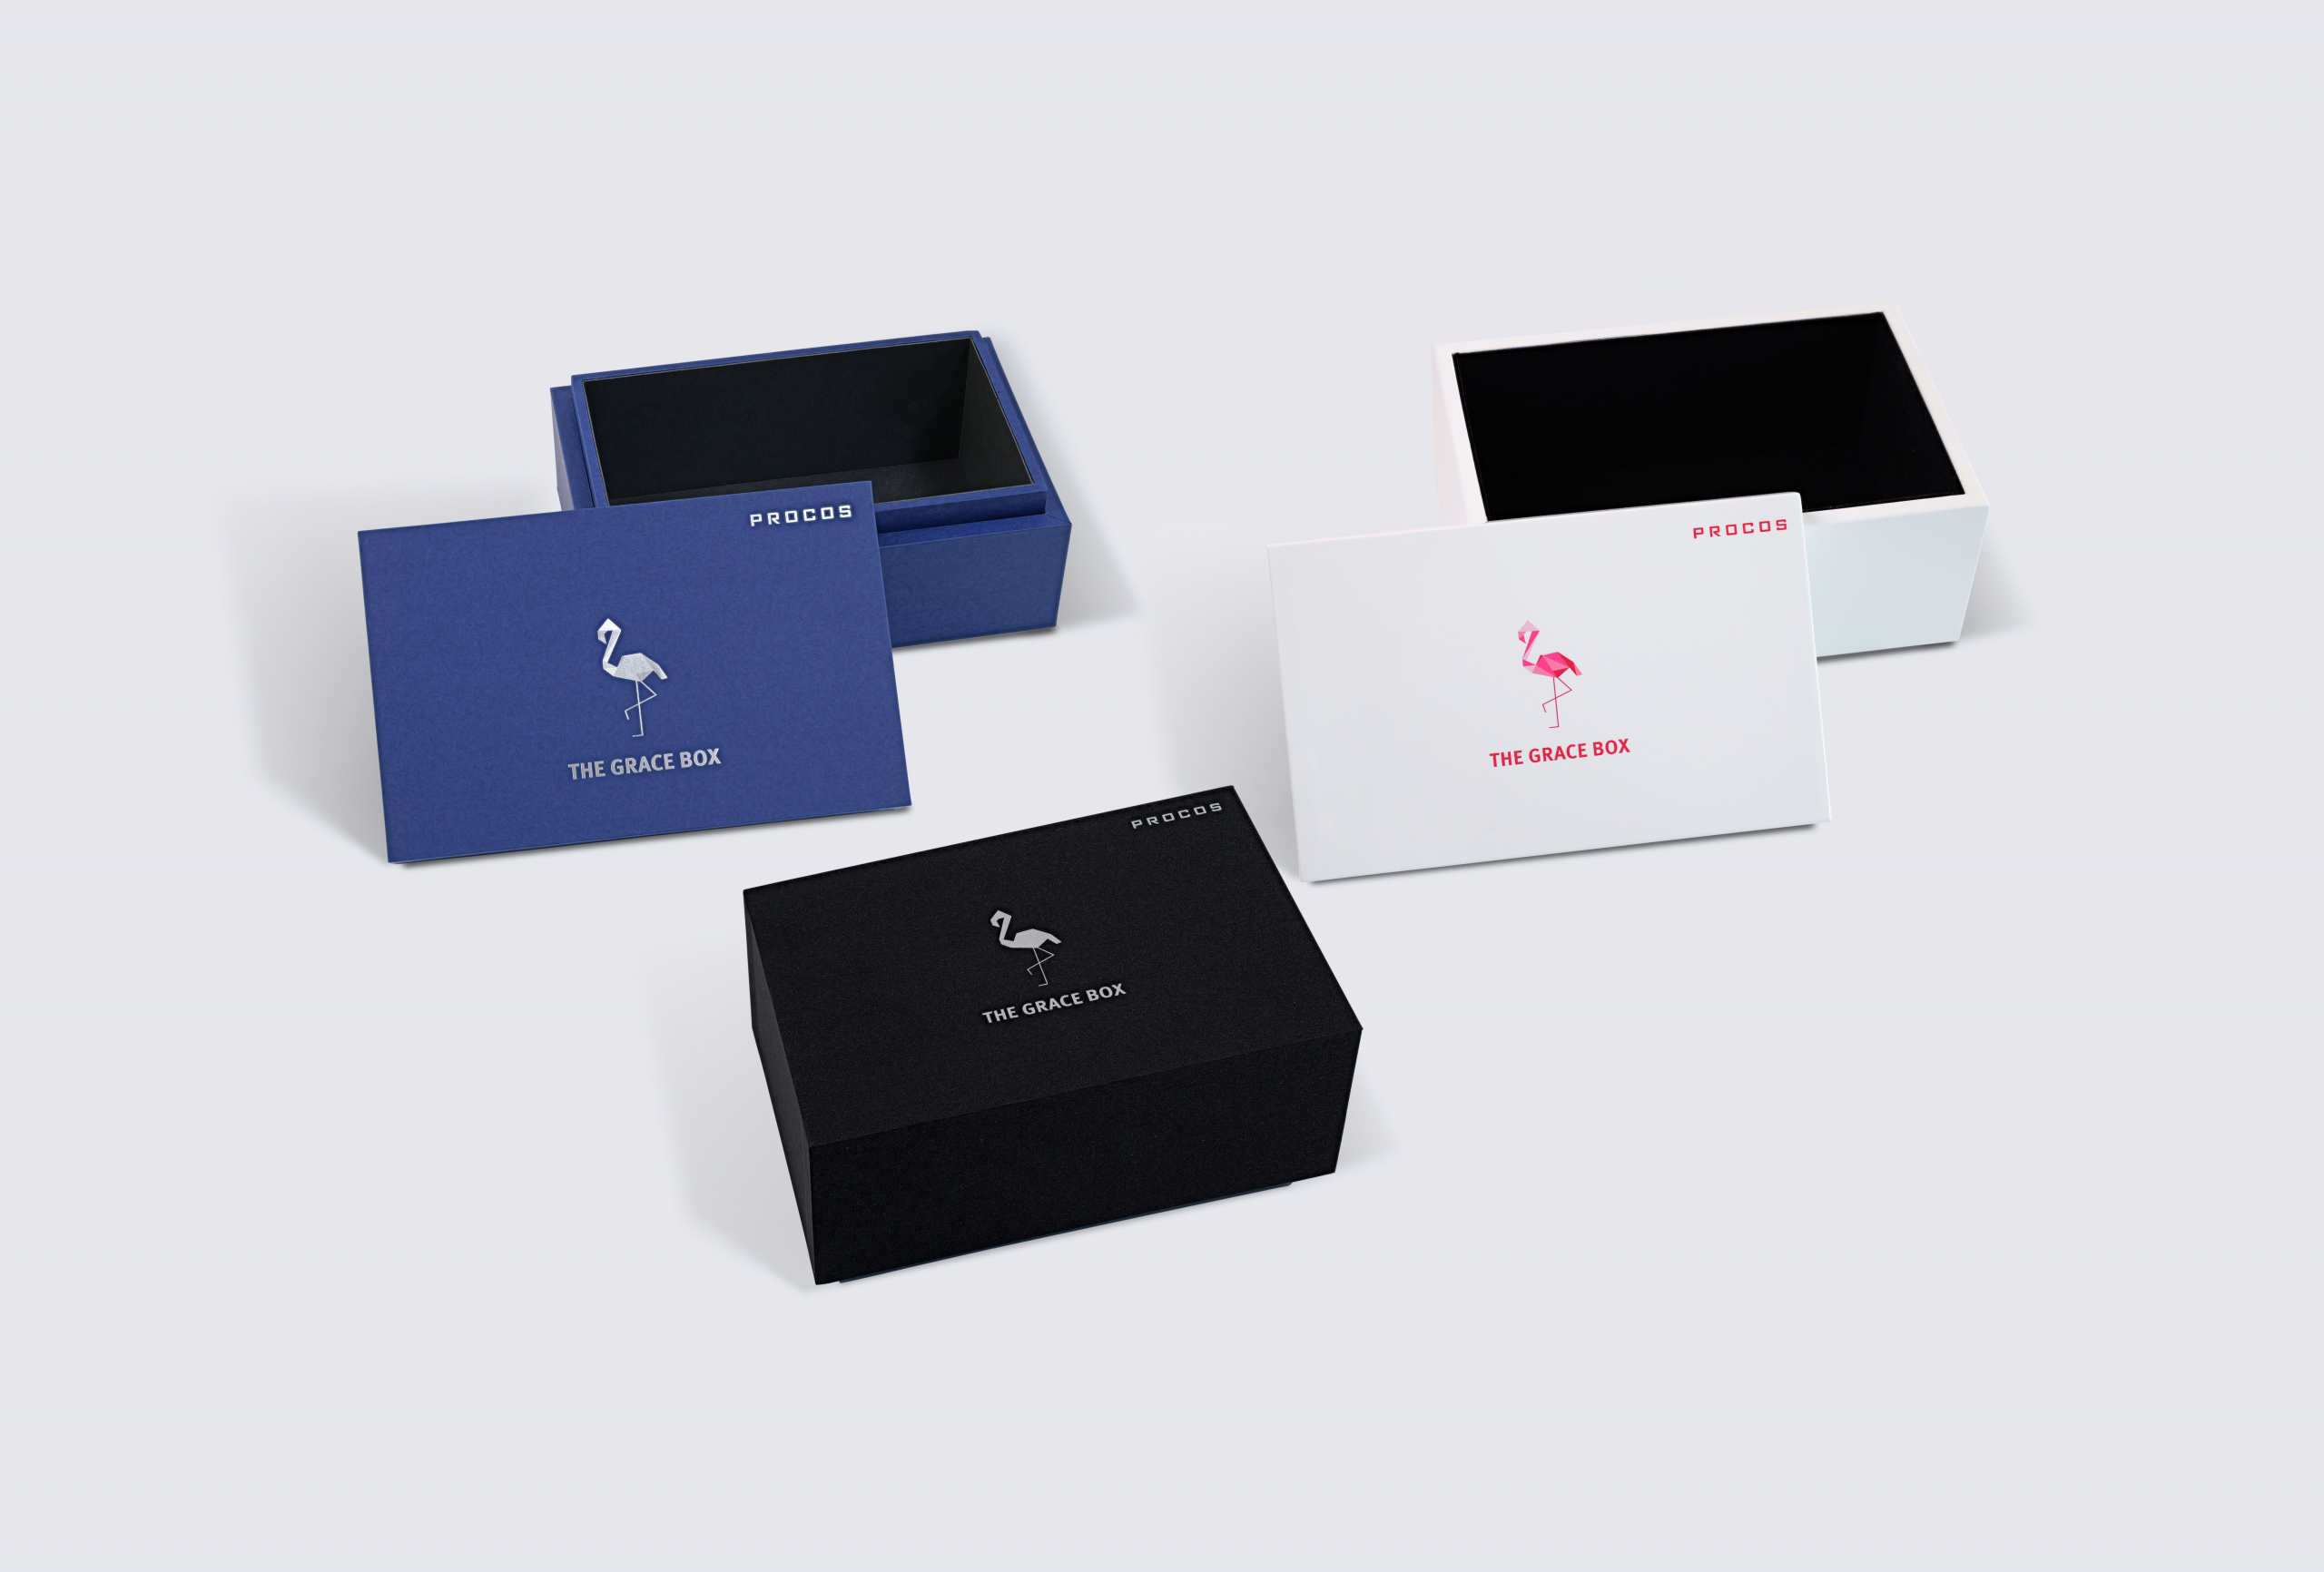 PROCOS presents the « GRACE BOX » at Luxe Pack Monaco. An elegant, refined and eco-responsible box